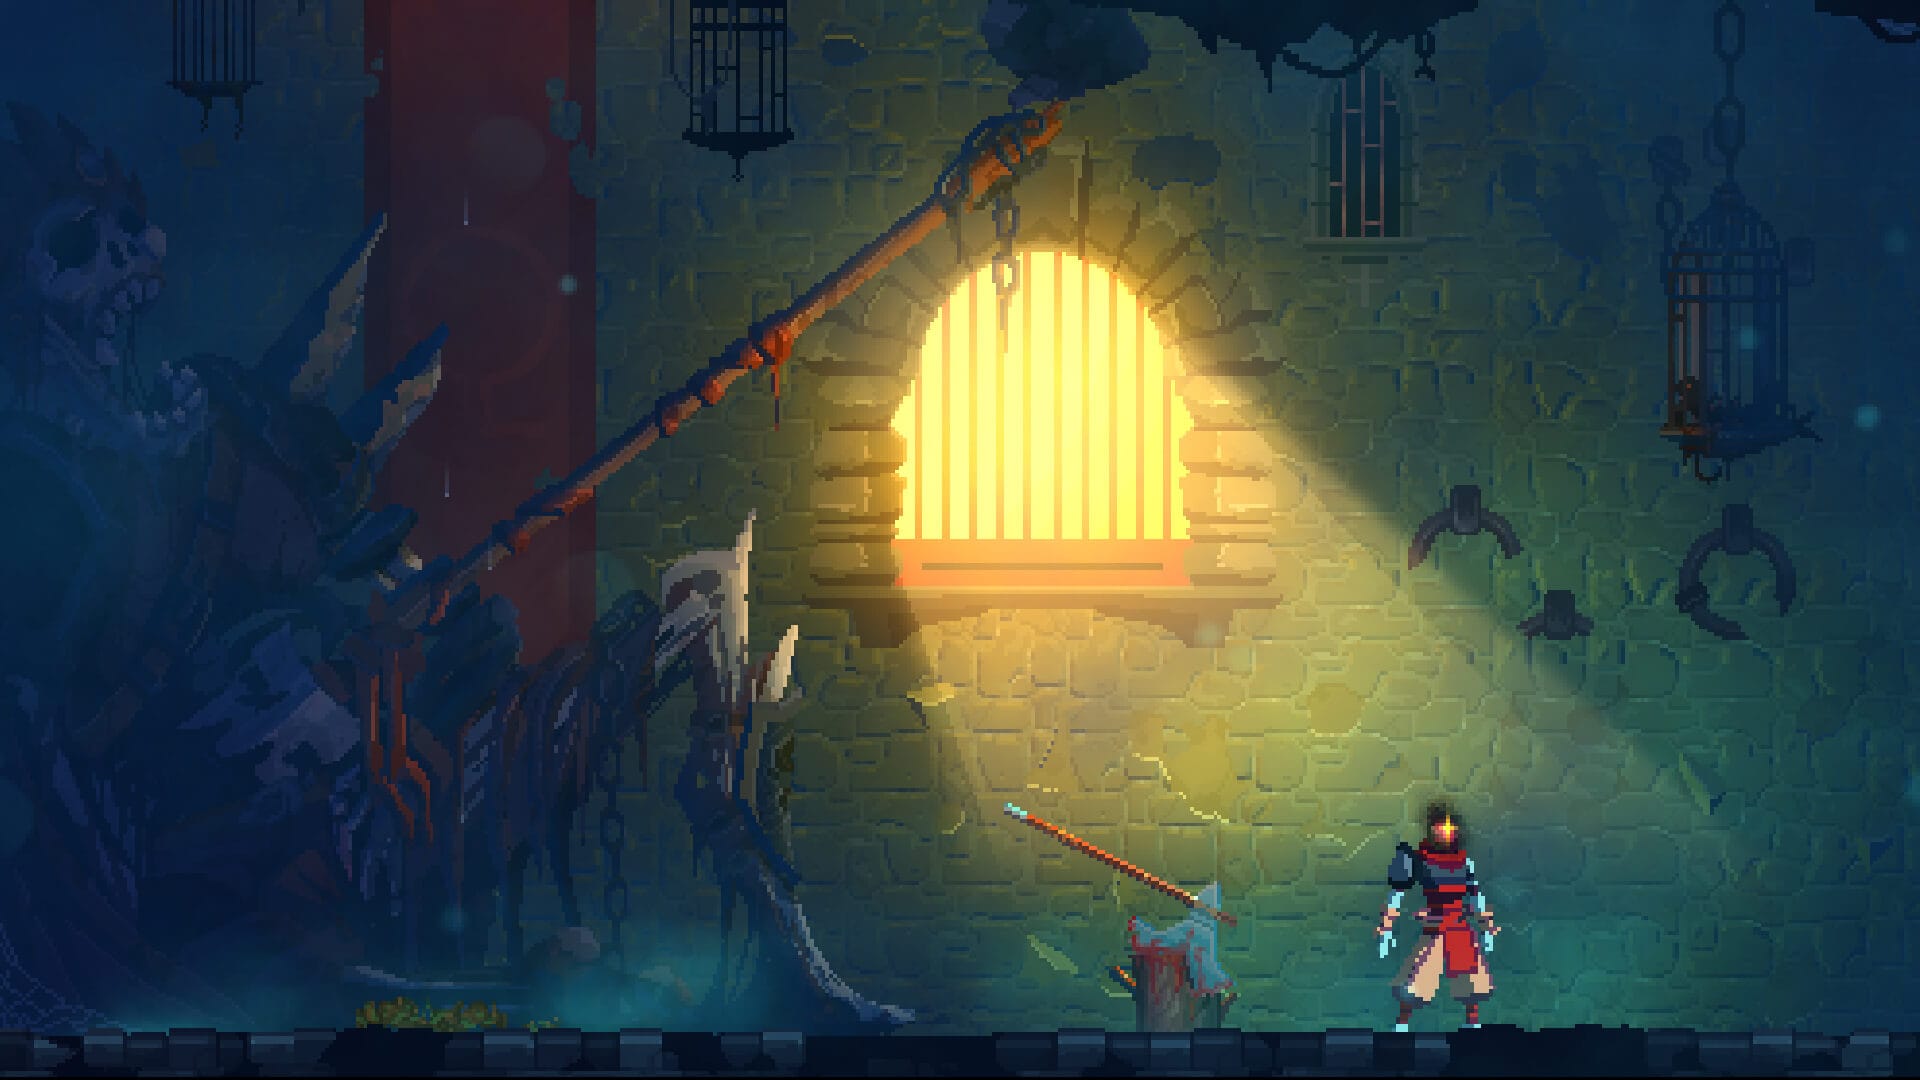 The player framed by a giant's corpse in Dead Cells